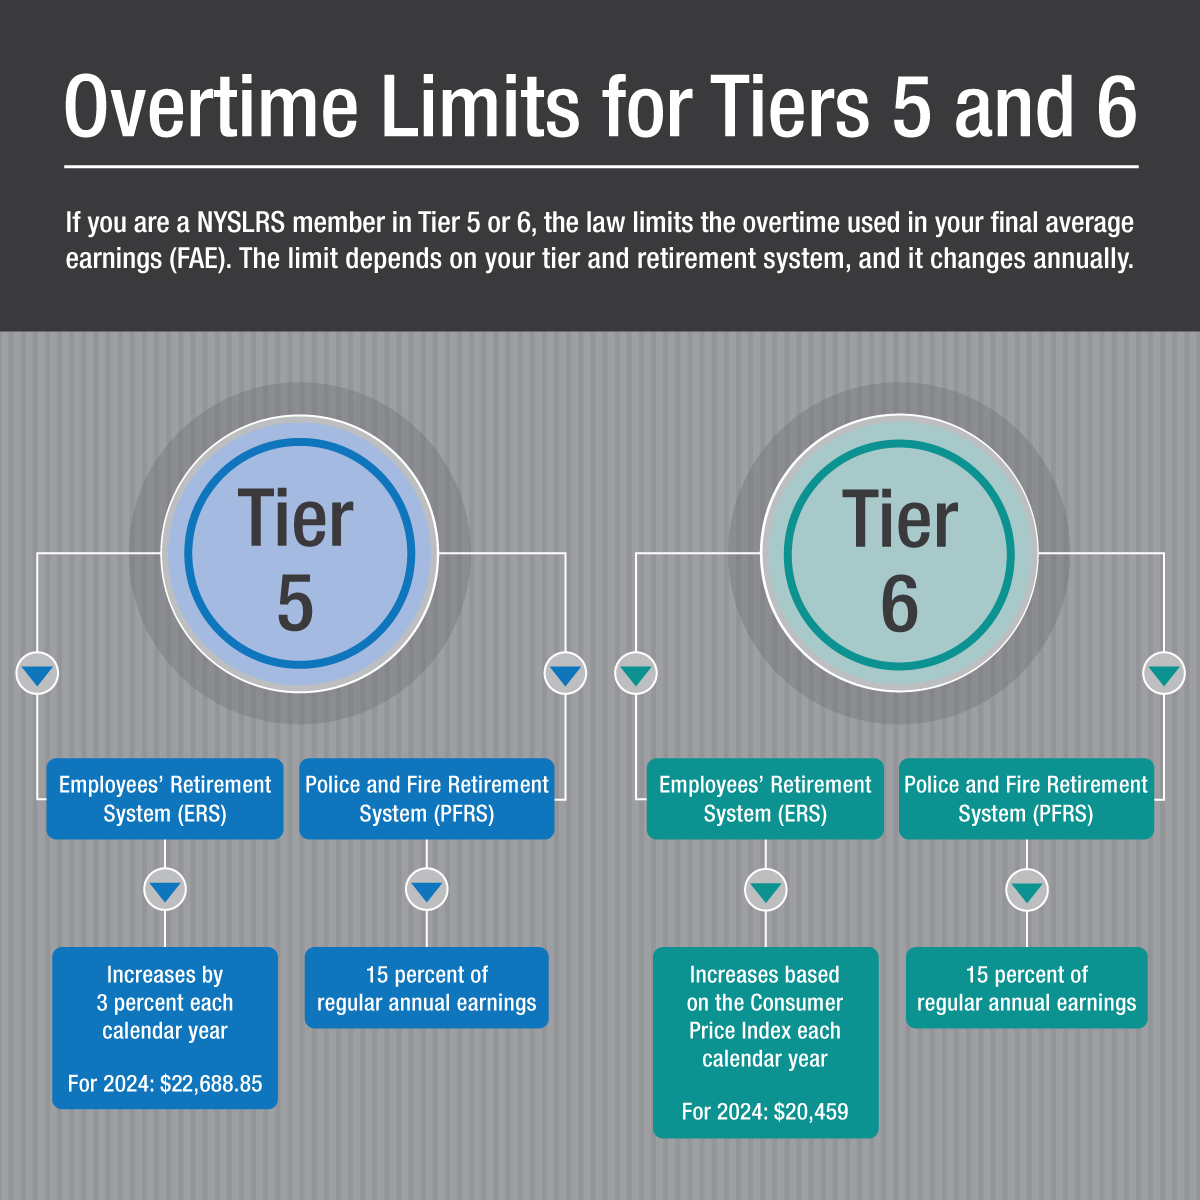 Overtime Limits for Tier 5 and 6 Members